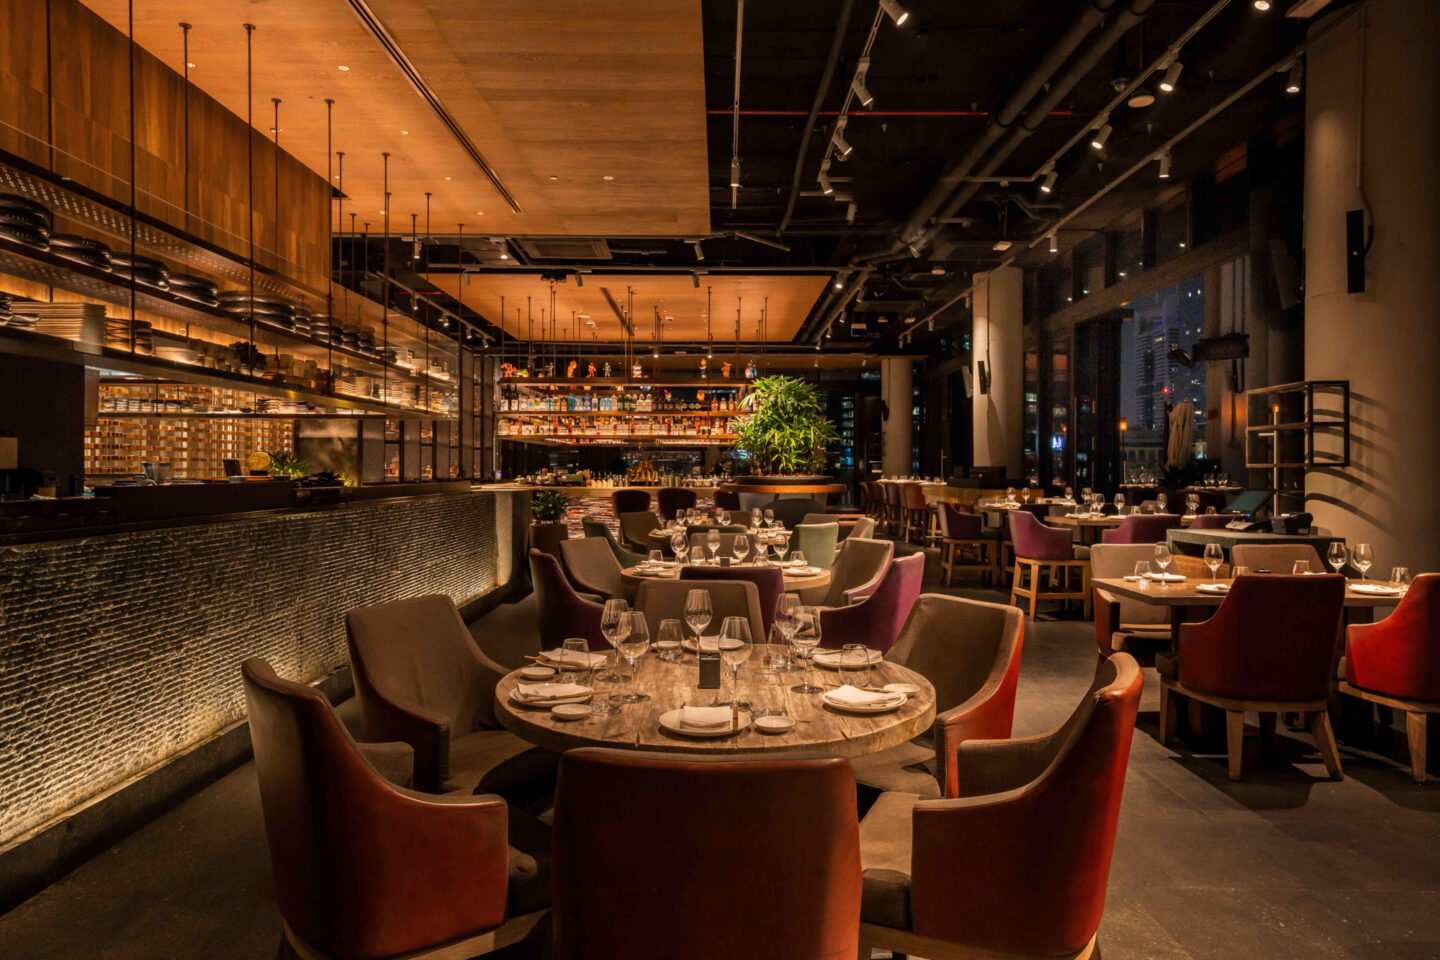 CLAP Dubai, is a fine-dining Japanese restaurant located in the heart of DIFC.